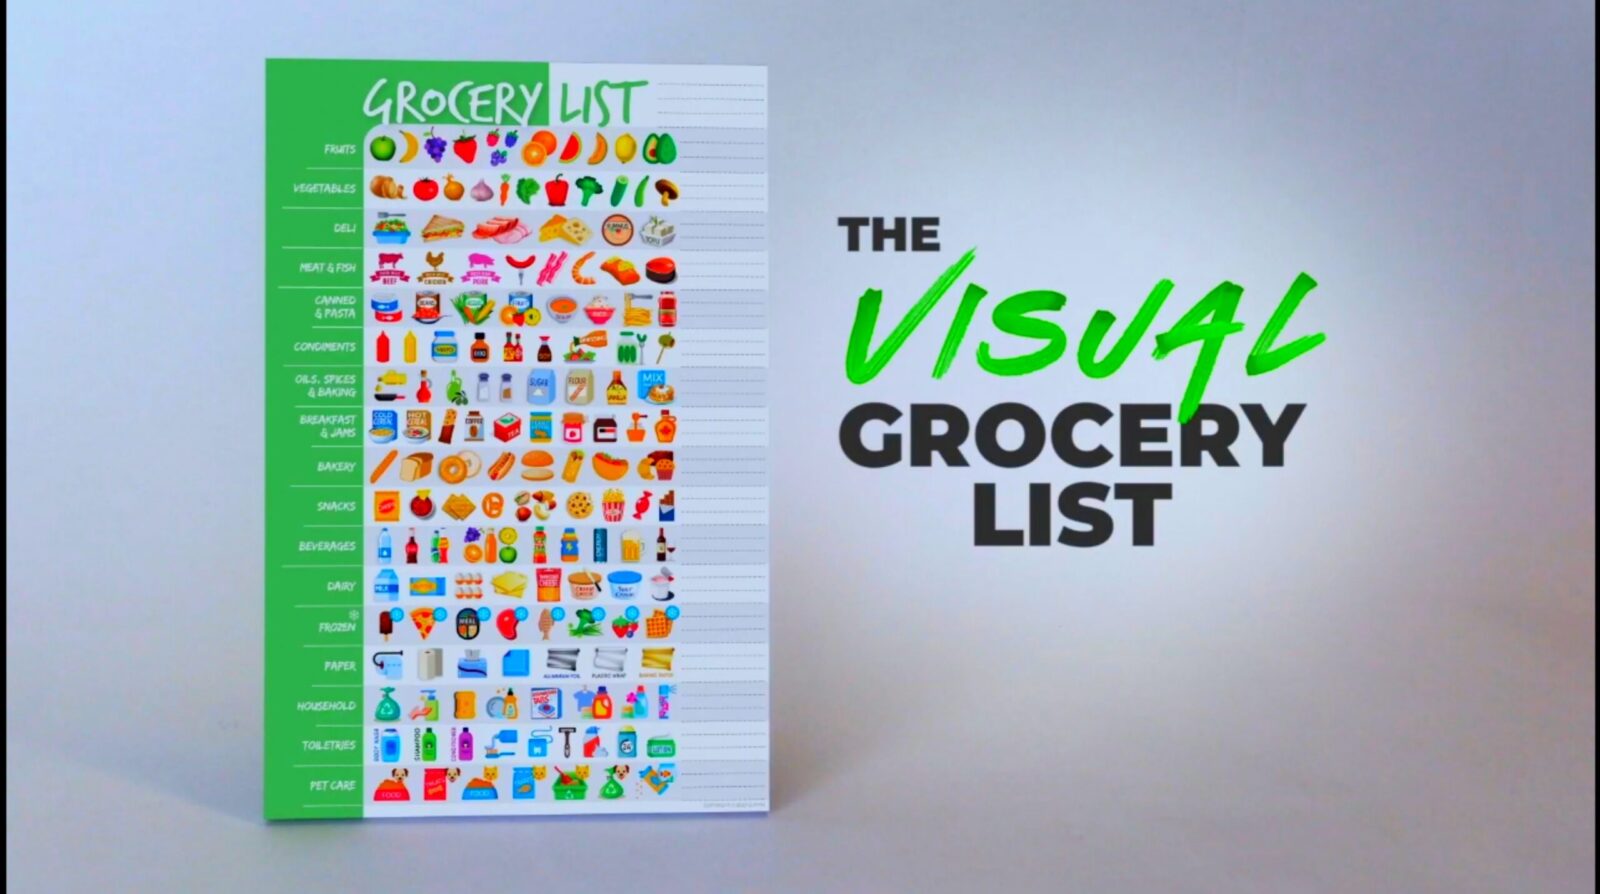 How Can I Use Visual Grocery List and What Should a Grocery List Include?